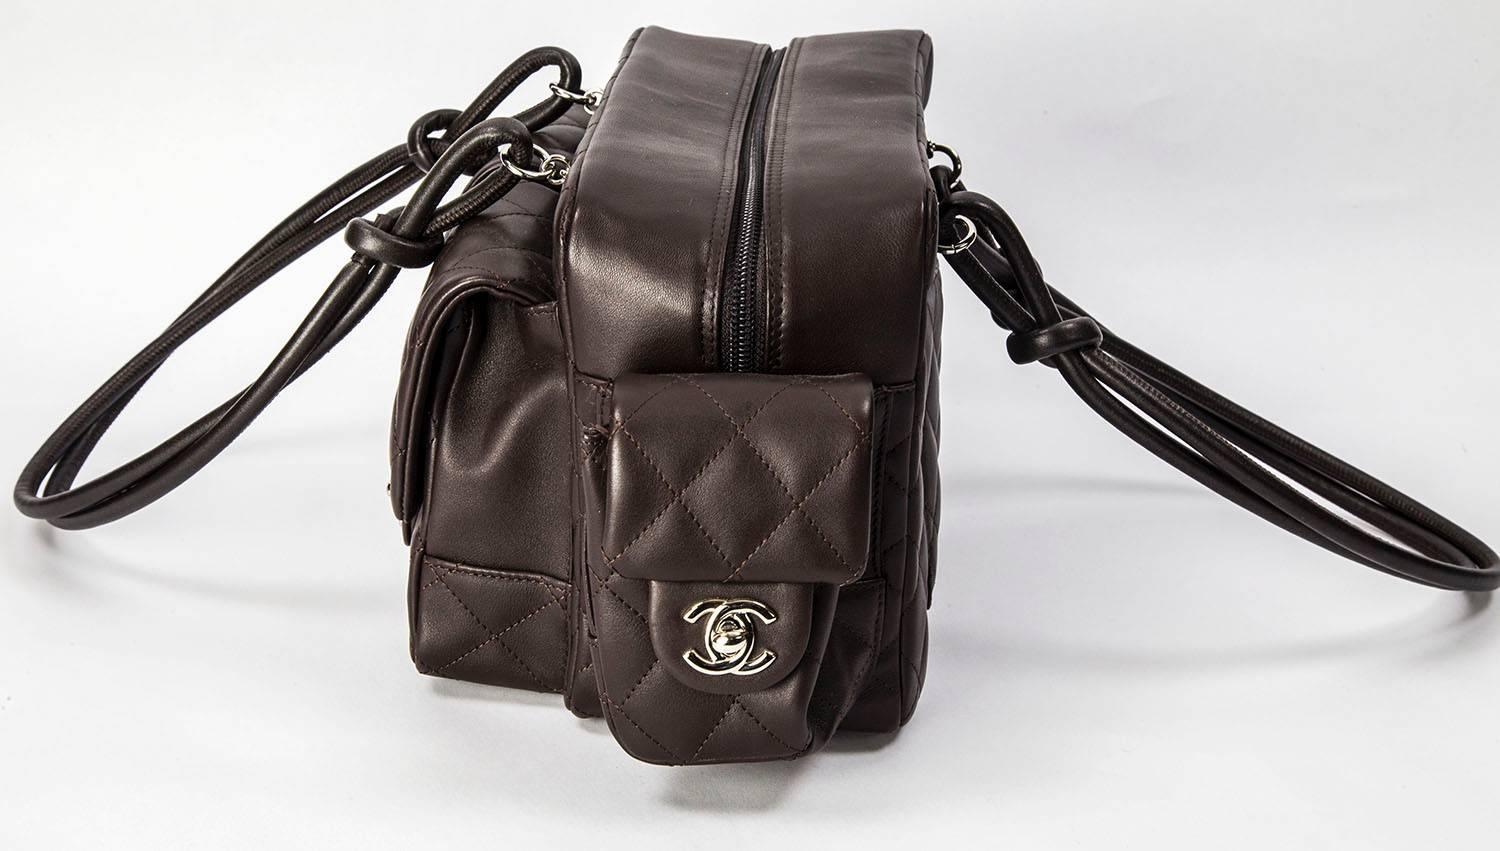 Signature Chanel Vintage Double Pocket Brown Quilted Leather Tote Handbag For Sale at 1stdibs